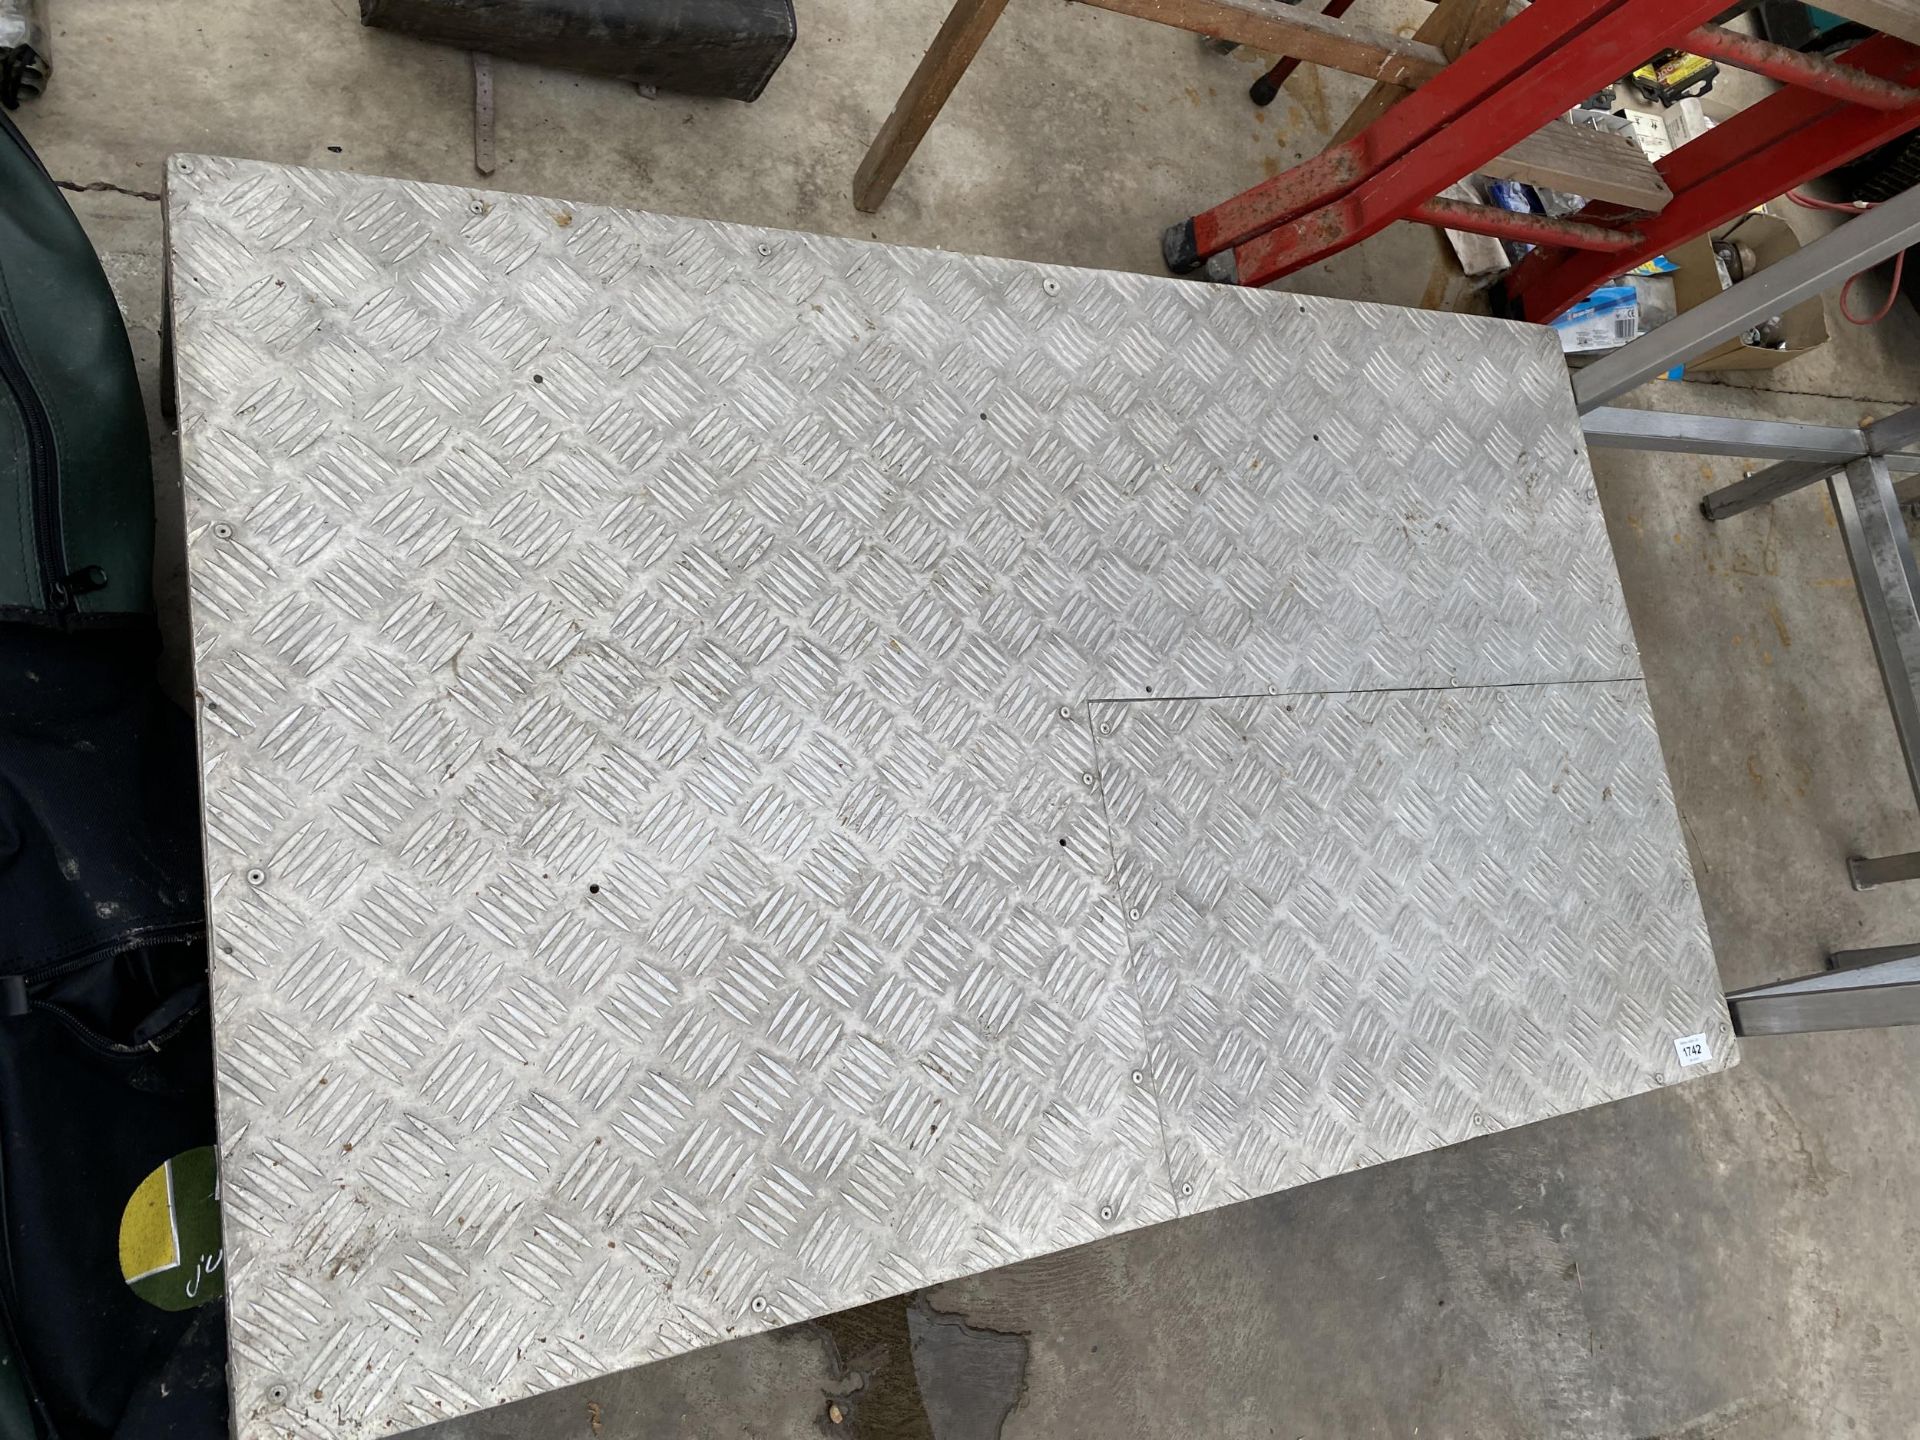 AN ALUMINIUM STEP WITH CHEQUER PLATE FLOOR - Image 2 of 4